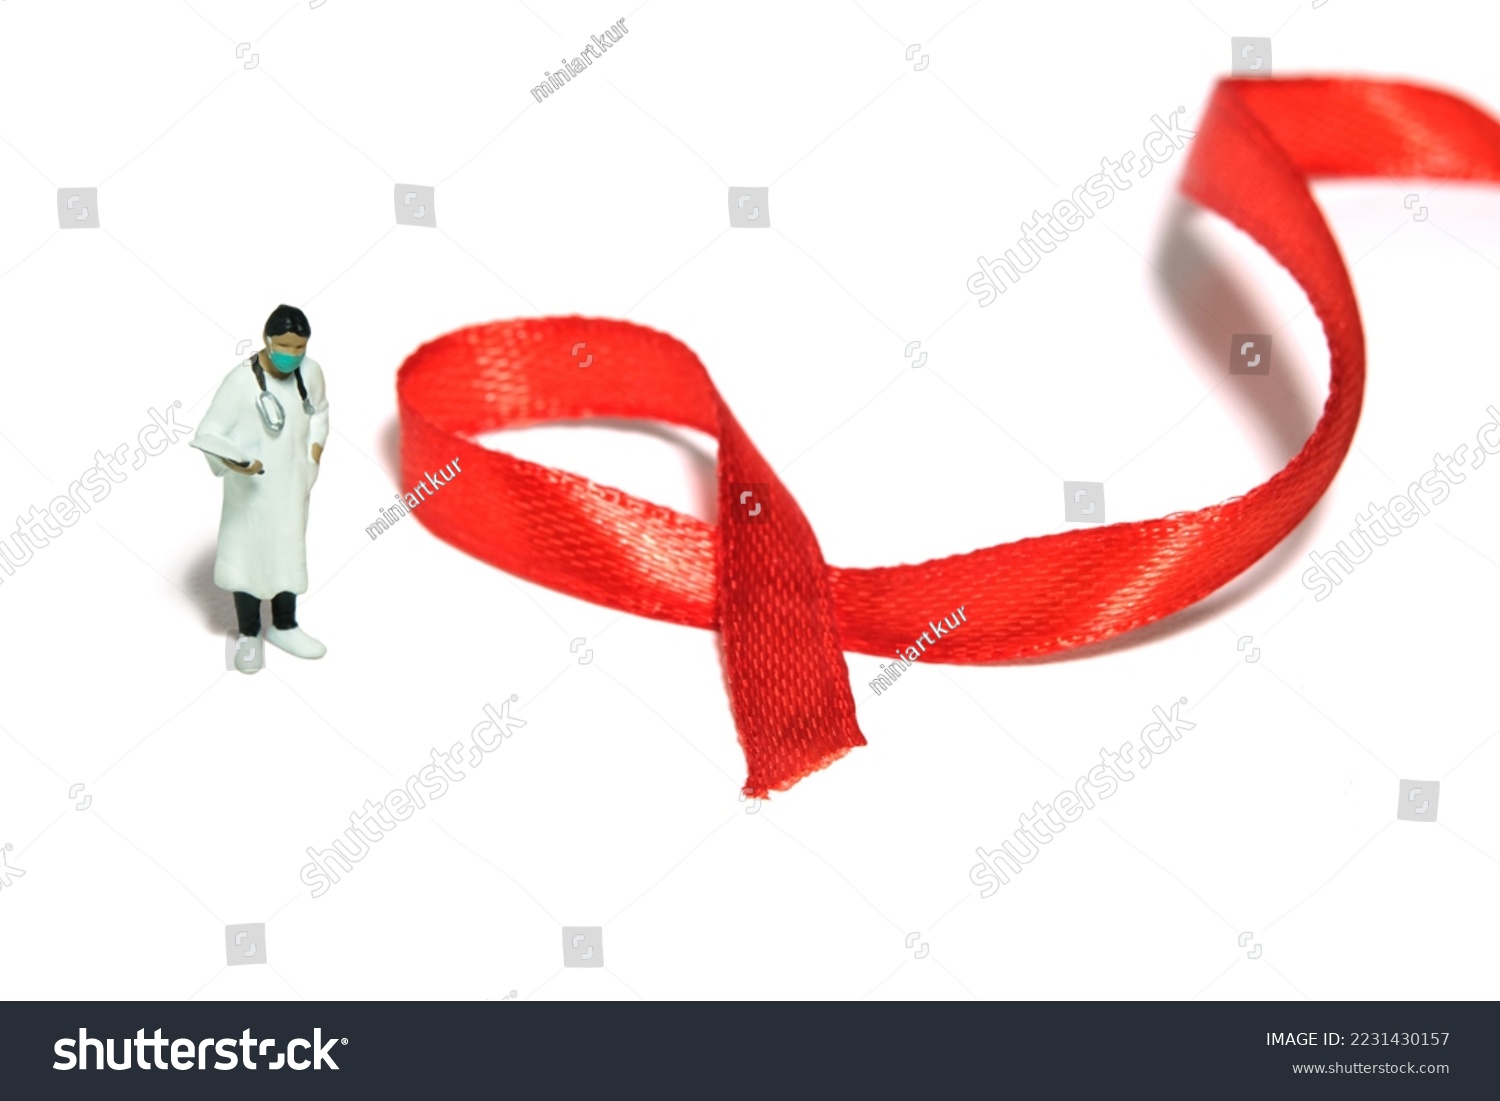 Miniature people figure toys photography. World AIDS Day awareness day concept. Girl woman doctor standing beside red ribbon. Isolated on white background. Image photo #2231430157